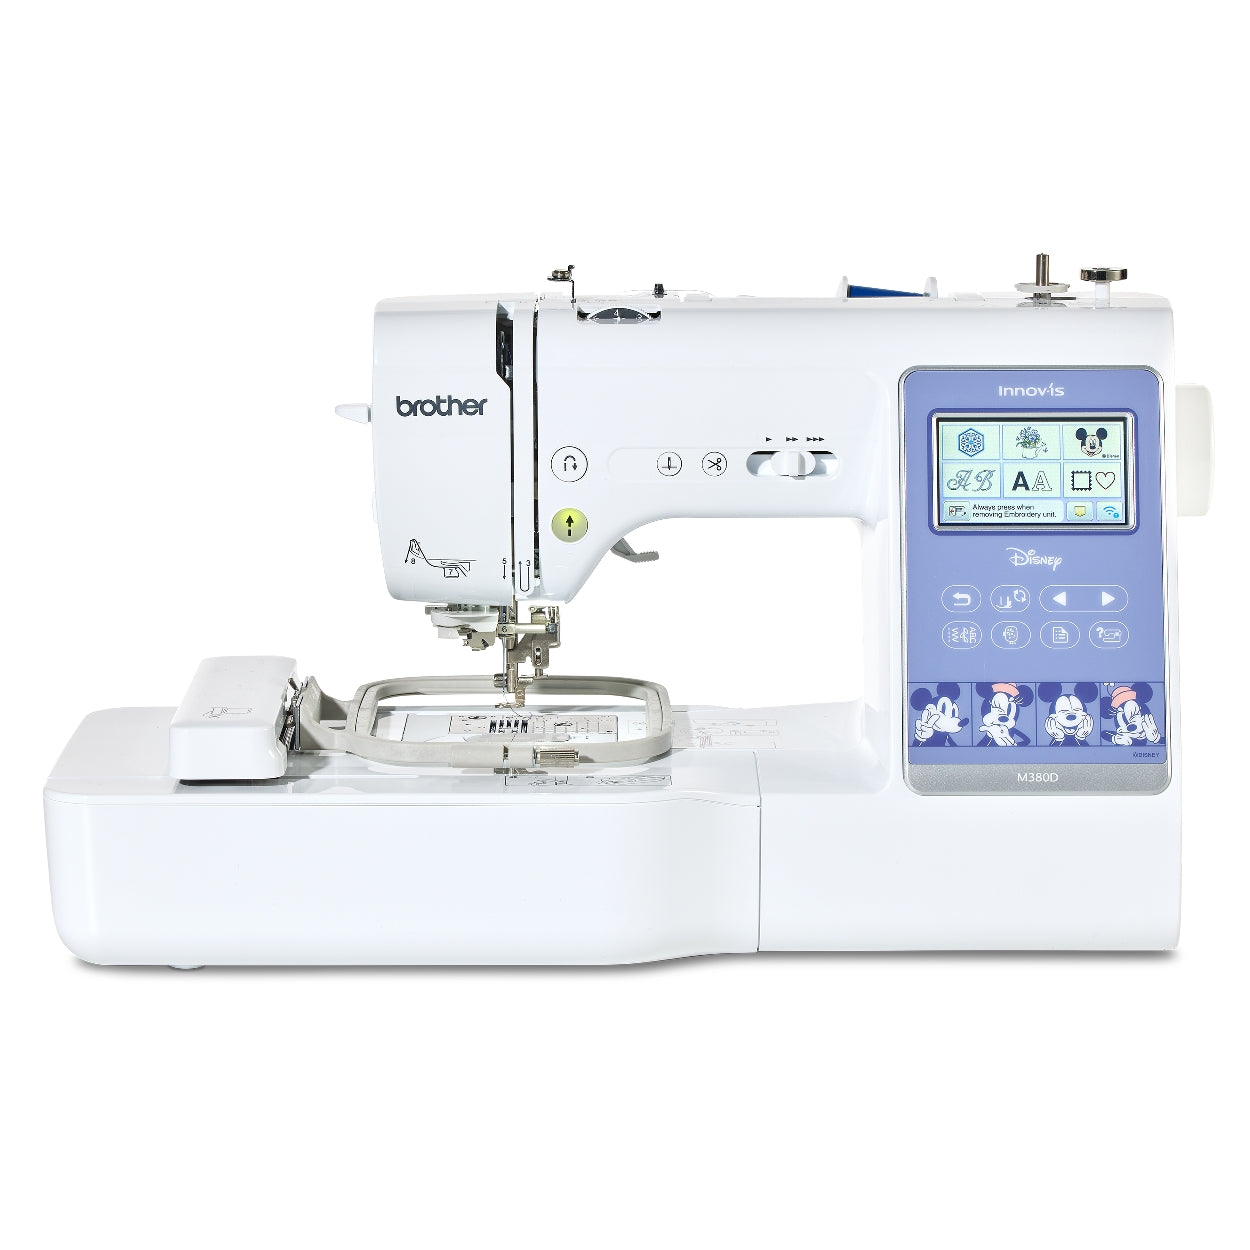 Brother Innov-is M380D Sewing and embroidery machine from Jaycotts Sewing Supplies